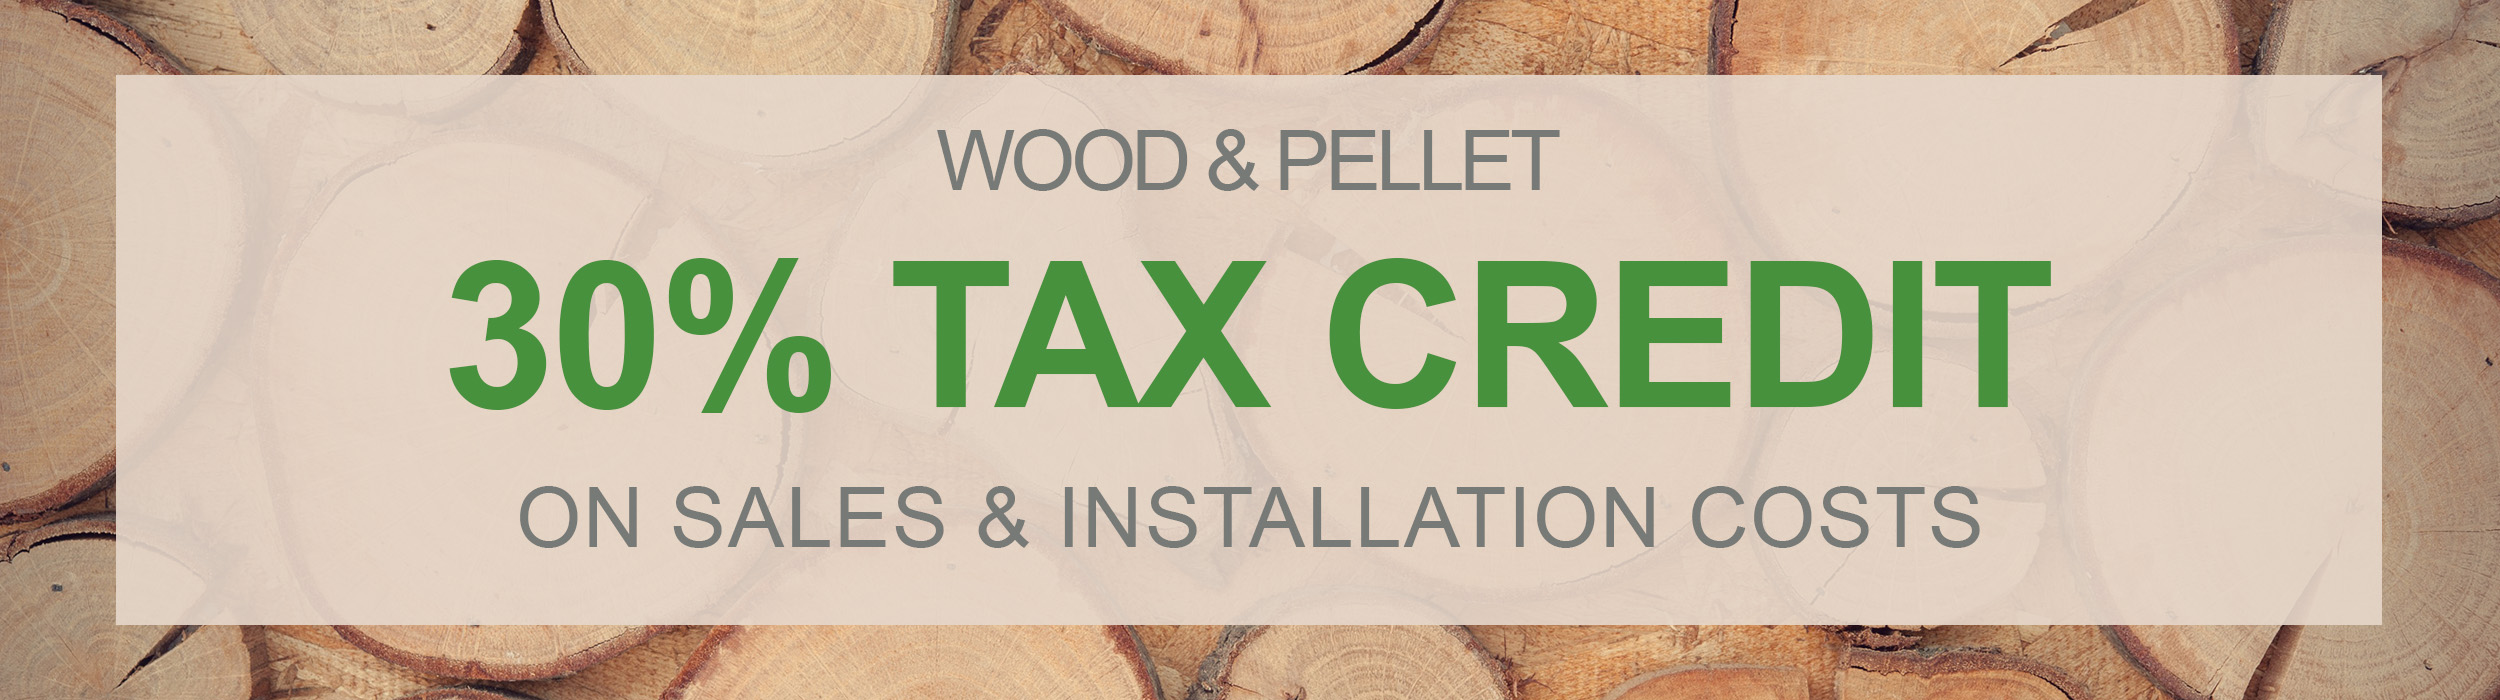 biomass tax credit for fireplaces & stoves